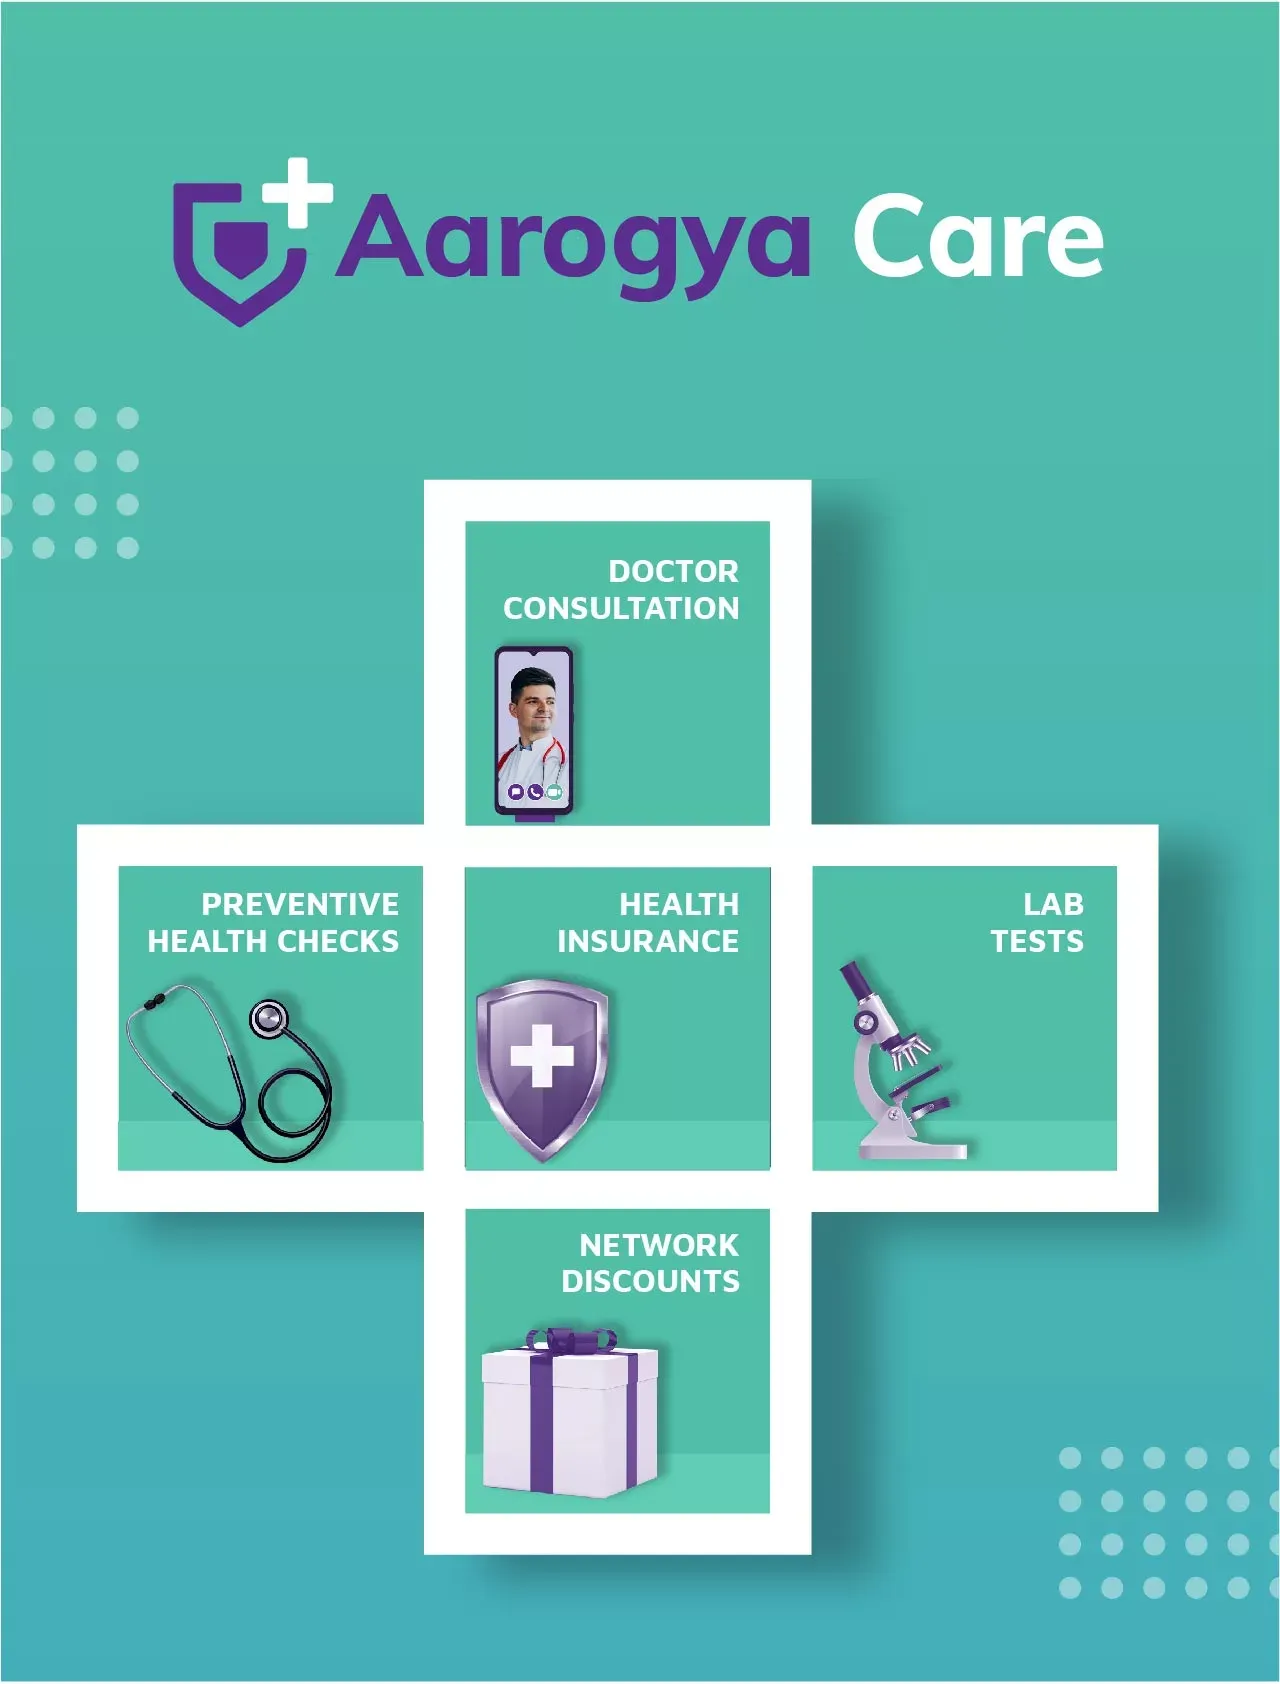 Aarogya Care Banner - Doctor Consultation, Preventive Health Checks, \ Health Insurance, Lab Tests, Network Discounts